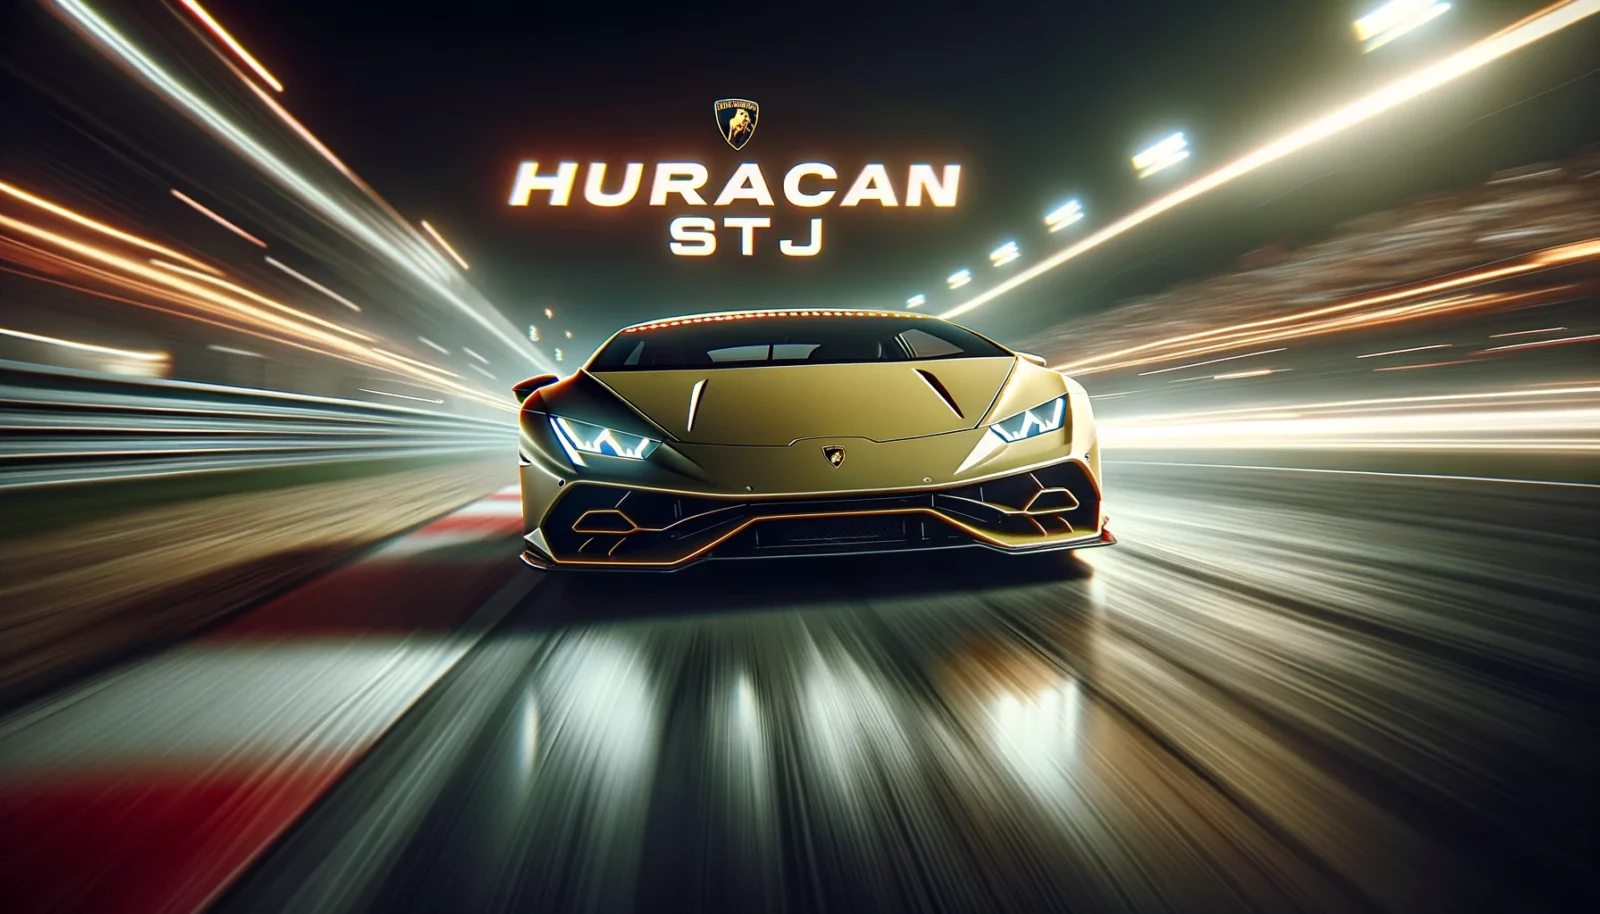 Dall·e 2024 02 28 17. 46. 41 create a photorealistic image where the focus is on the text huracan stj displayed prominently in the foreground with a lamborghini huracan subtly